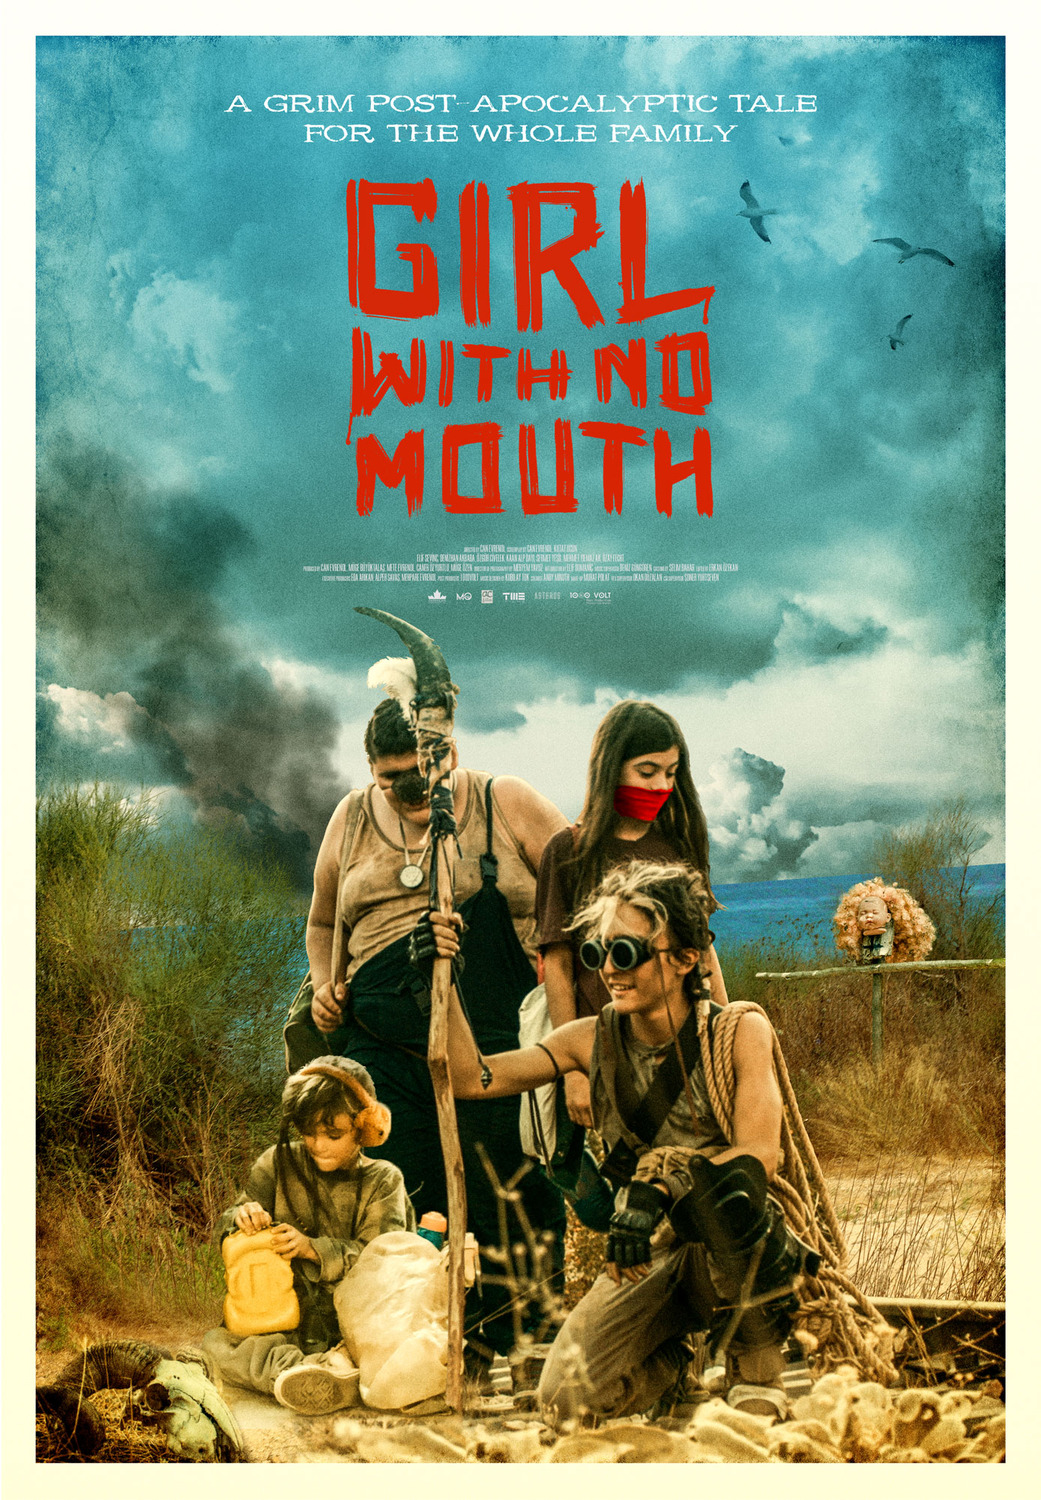 Extra Large Movie Poster Image for Girl With No Mouth (#2 of 2)